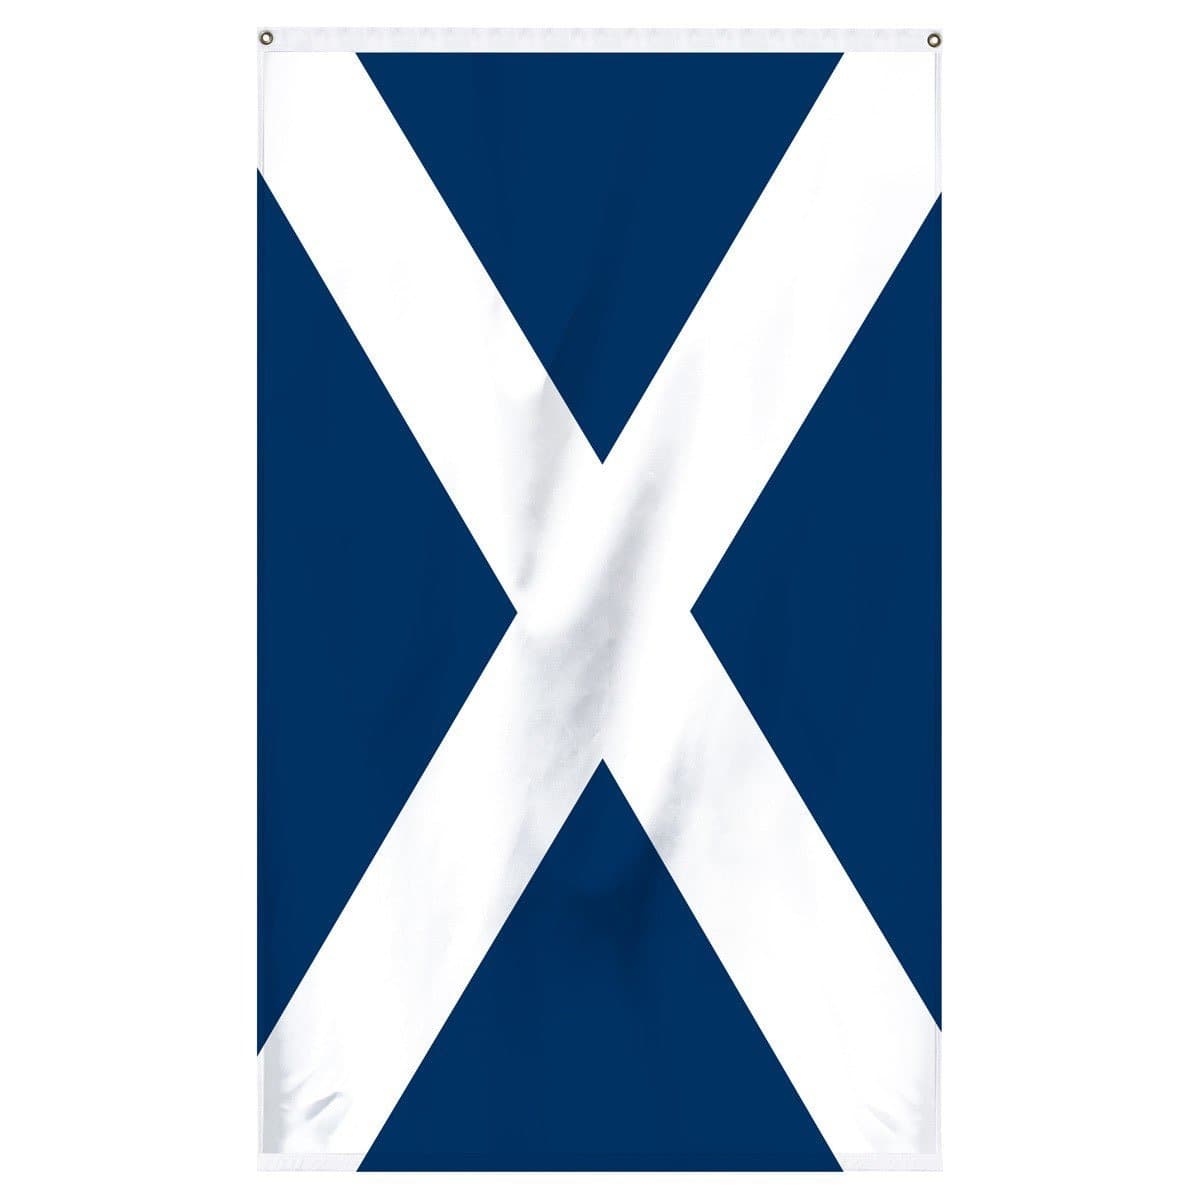 Scotland National flag with cross for sale to buy online. Blue flag with white cross.